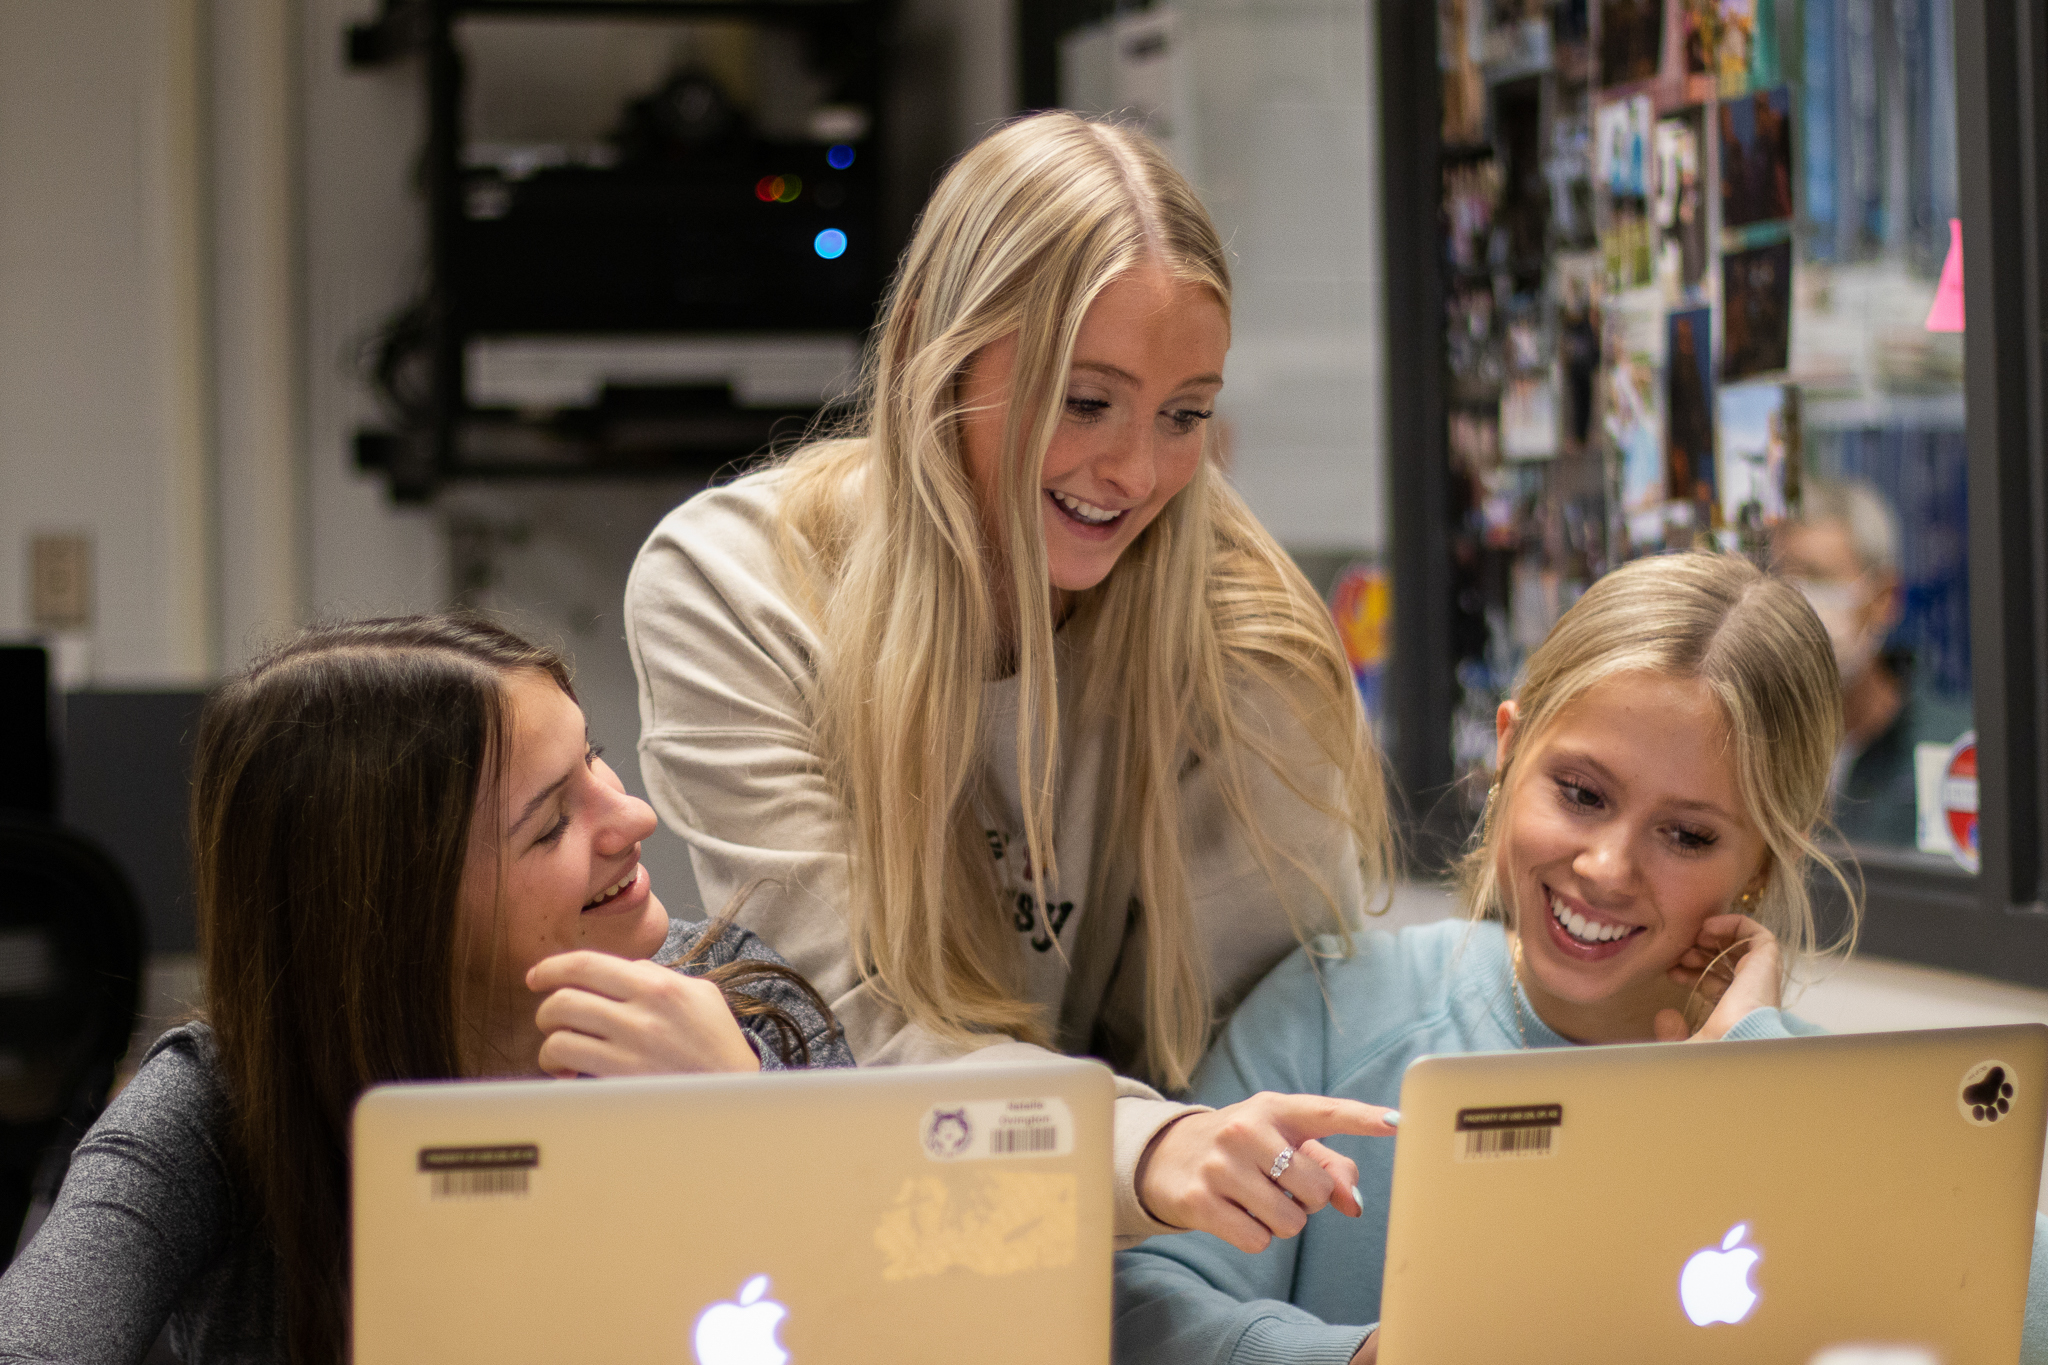 A photo of three girls looking at their computer screens. One girl is behind them and pointing at something on their screen. They are smiling and laughing.